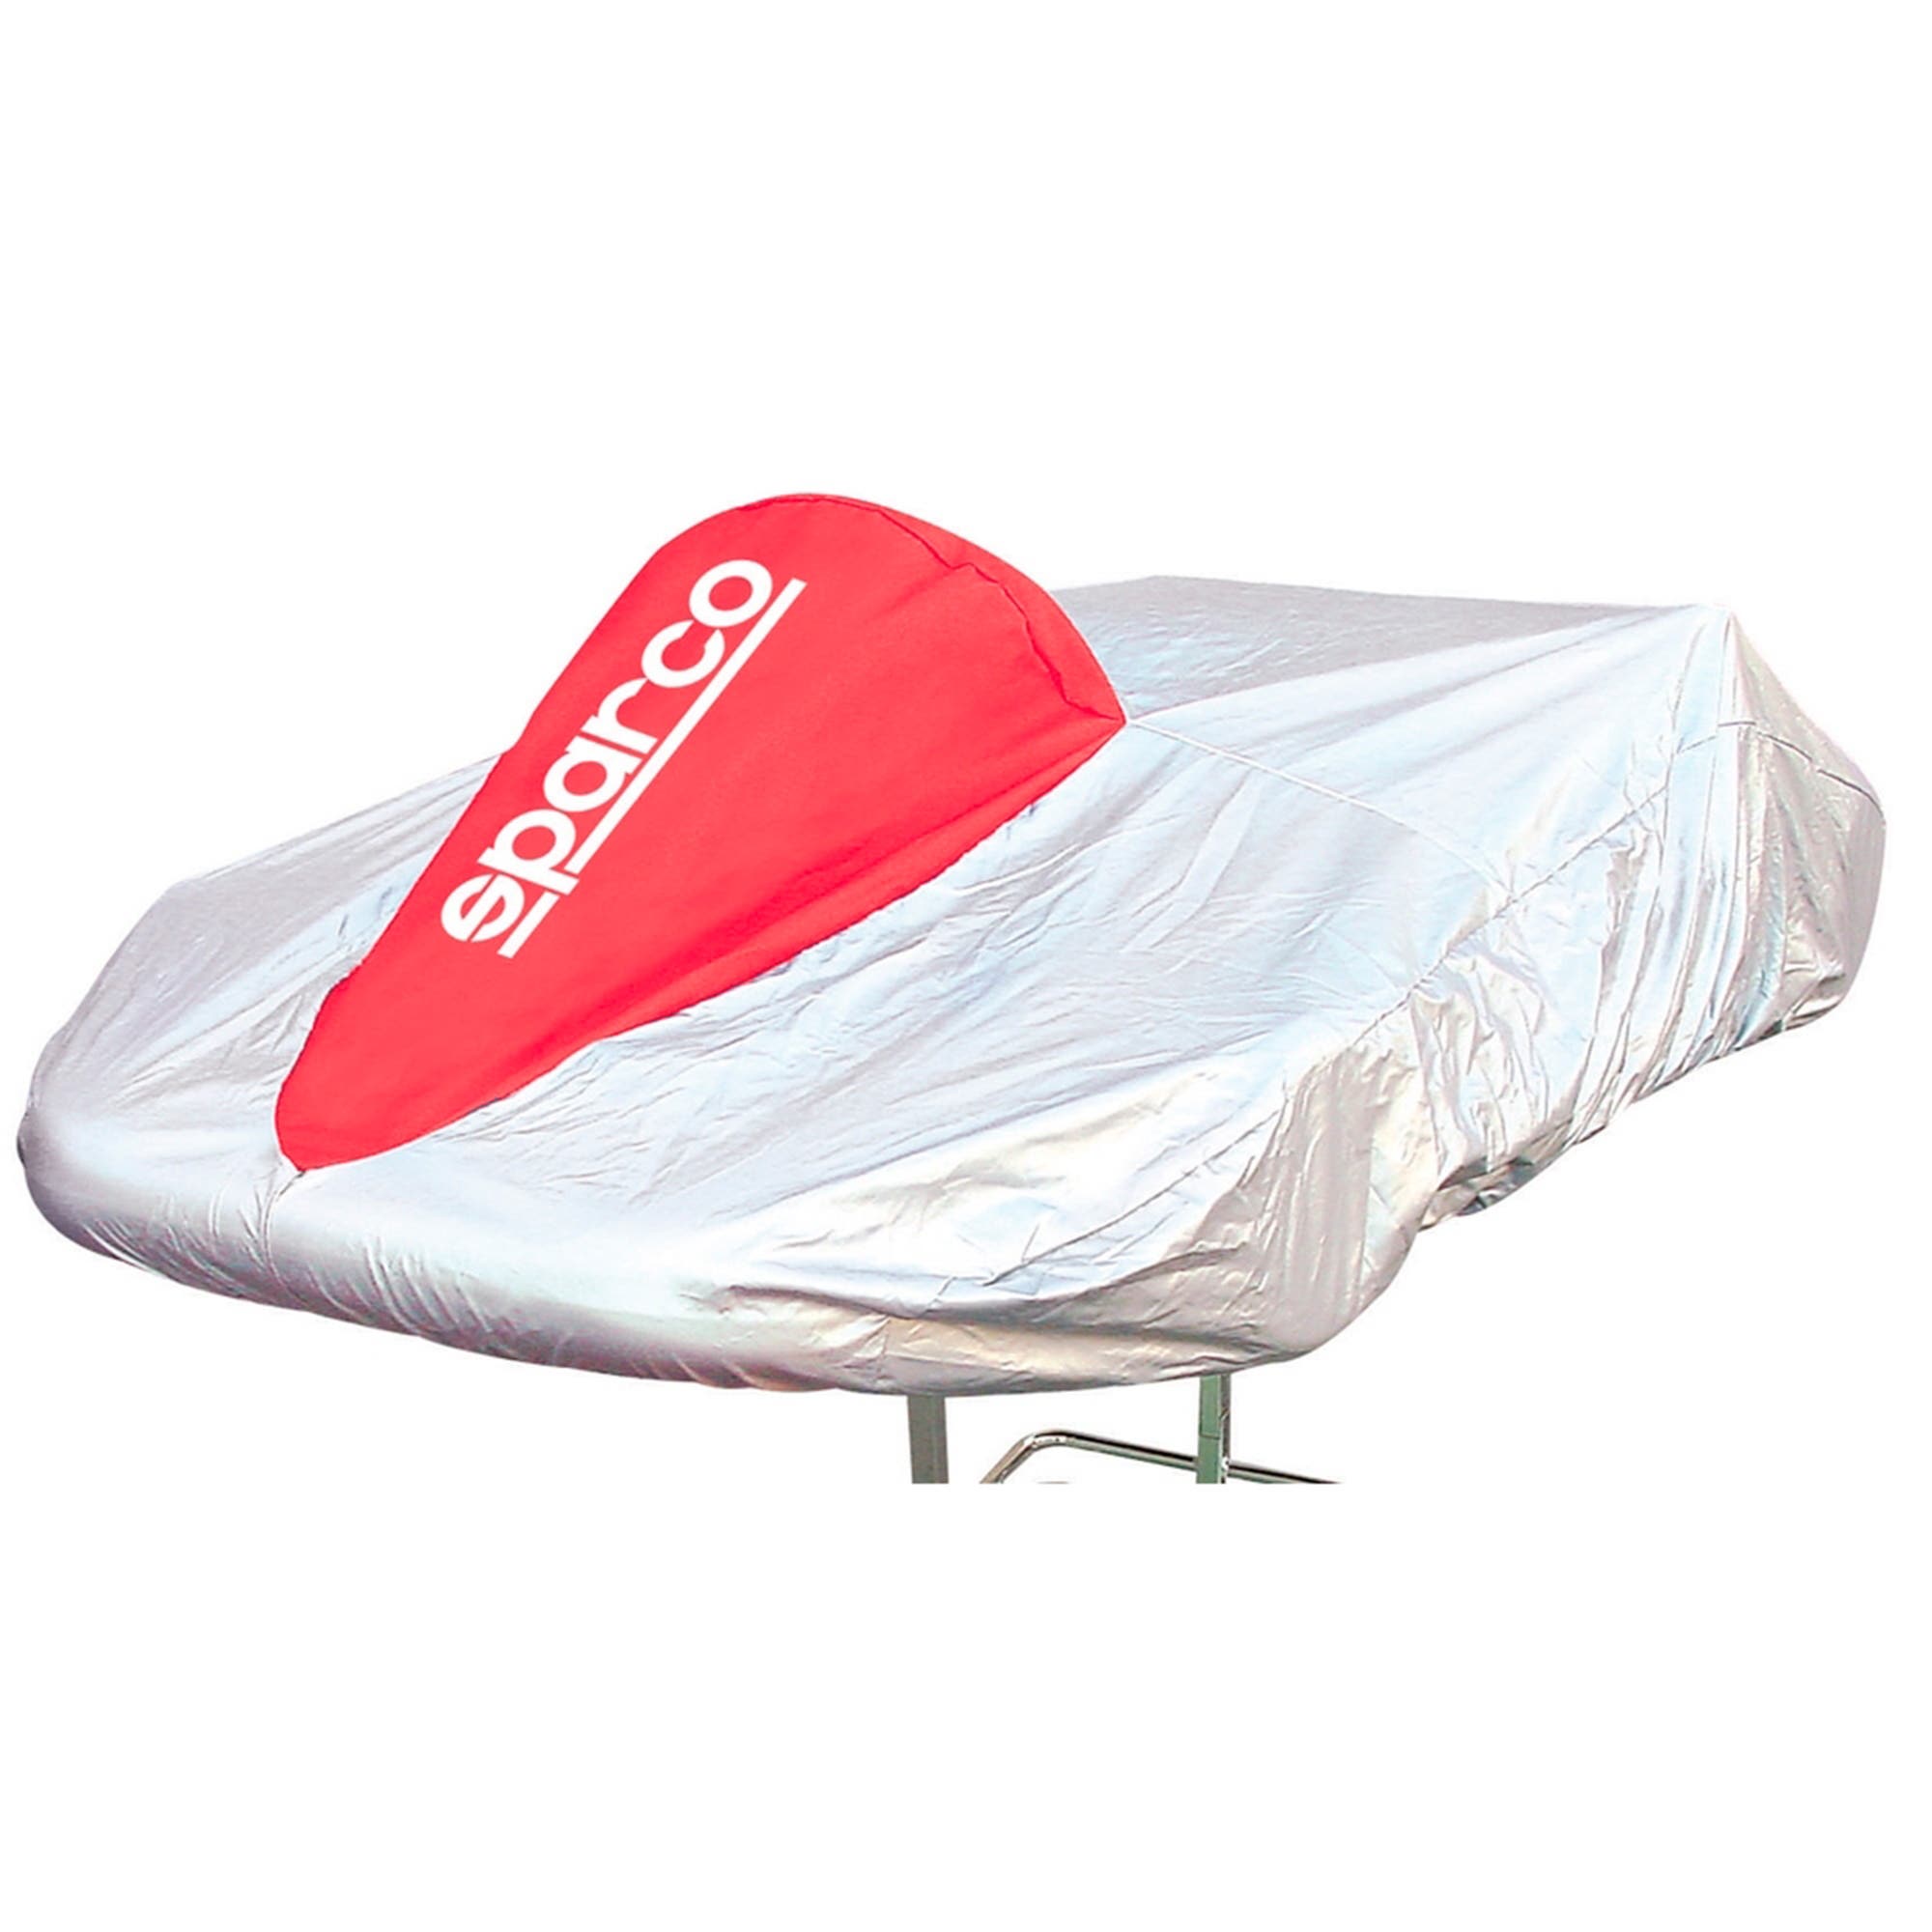 KART COVER RED - Sparco Shop